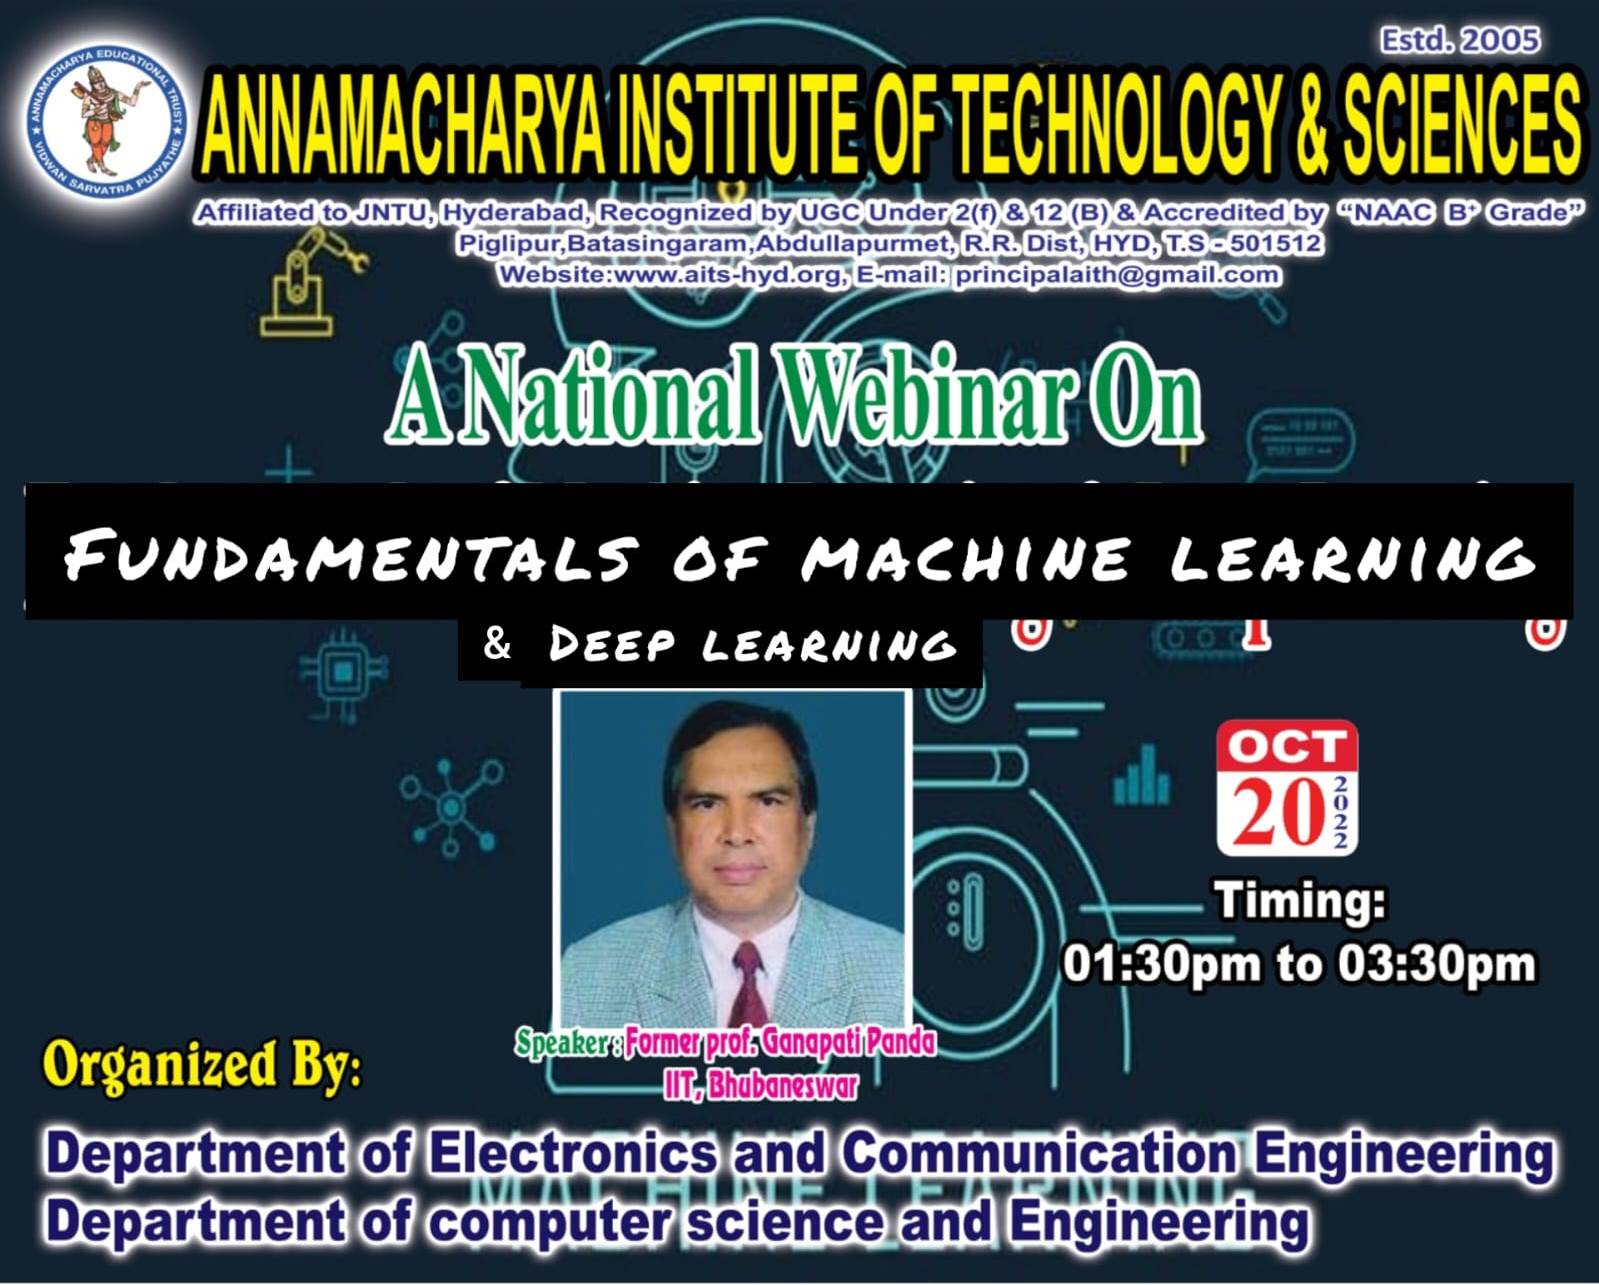 NATIONAL WEBINAR IN ANNAMACHARYA INSTITUTE OF TECHNOLOGY AND SCIENCES